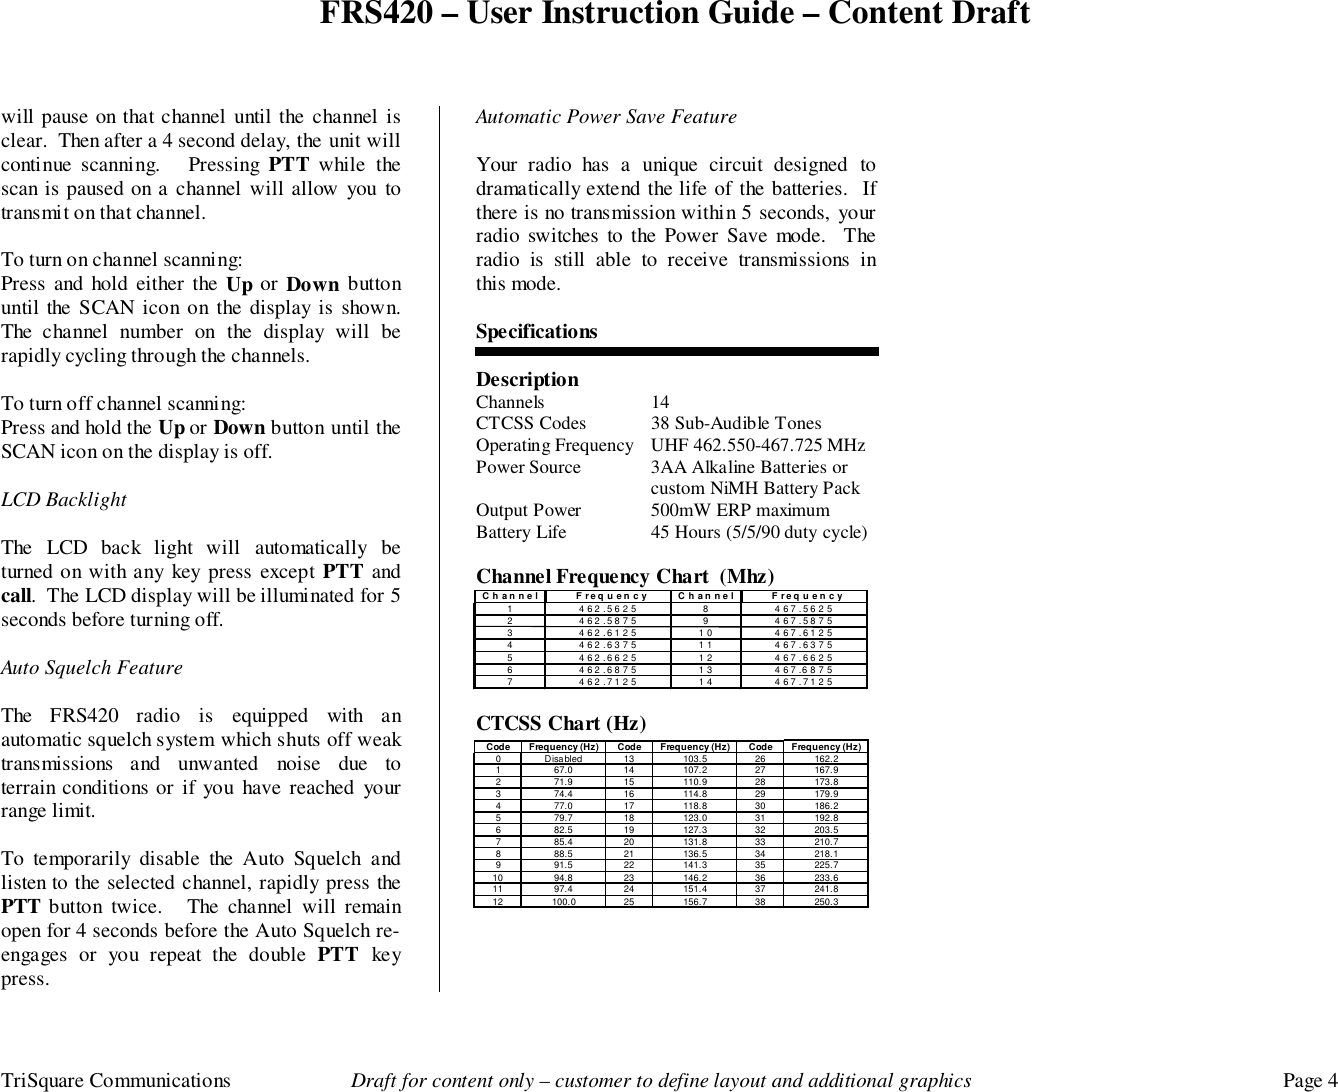 FRS420 – User Instruction Guide – Content DraftTriSquare Communications Draft for content only – customer to define layout and additional graphics Page 4will pause on that channel until the channel isclear.  Then after a 4 second delay, the unit willcontinue scanning.   Pressing PTT  while thescan is paused on a channel will allow you totransmit on that channel.To turn on channel scanning:Press and hold either the Up or  Down buttonuntil the SCAN icon on the display is shown.The channel number on the display will berapidly cycling through the channels.To turn off channel scanning:Press and hold the Up or Down button until theSCAN icon on the display is off.LCD BacklightThe LCD back light will automatically beturned on with any key press except PTT andcall.  The LCD display will be illuminated for 5seconds before turning off.Auto Squelch FeatureThe FRS420 radio is equipped with anautomatic squelch system which shuts off weaktransmissions and unwanted noise due toterrain conditions or if you have reached yourrange limit.To temporarily disable the Auto Squelch andlisten to the selected channel, rapidly press thePTT button twice.   The channel will remainopen for 4 seconds before the Auto Squelch re-engages or you repeat the double PTT  keypress.Automatic Power Save FeatureYour radio has a unique circuit designed todramatically extend the life of the batteries.  Ifthere is no transmission within 5 seconds, yourradio switches to the Power Save mode.  Theradio is still able to receive transmissions inthis mode.SpecificationsDescriptionChannels 14CTCSS Codes 38 Sub-Audible TonesOperating Frequency UHF 462.550-467.725 MHzPower Source 3AA Alkaline Batteries orcustom NiMH Battery PackOutput Power 500mW ERP maximumBattery Life 45 Hours (5/5/90 duty cycle)Channel Frequency Chart  (Mhz)CTCSS Chart (Hz)Code Frequency (Hz) Code Frequency (Hz) Code Frequency (Hz)0 Disabled 13 103.5 26 162.21 67.0 14 107.2 27 167.92 71.9 15 110.9 28 173.83 74.4 16 114.8 29 179.94 77.0 17 118.8 30 186.25 79.7 18 123.0 31 192.86 82.5 19 127.3 32 203.57 85.4 20 131.8 33 210.78 88.5 21 136.5 34 218.19 91.5 22 141.3 35 225.710 94.8 23 146.2 36 233.611 97.4 24 151.4 37 241.812 100.0 25 156.7 38 250.3 Channel Frequency Channel Frequency 1 462.5625 8 467.5625 2 462.5875 9 467.5875 3 462.6125 10 467.6125 4 462.6375 11 467.6375 5 462.6625 12 467.6625 6 462.6875 13 467.6875 7 462.7125 14 467.7125 